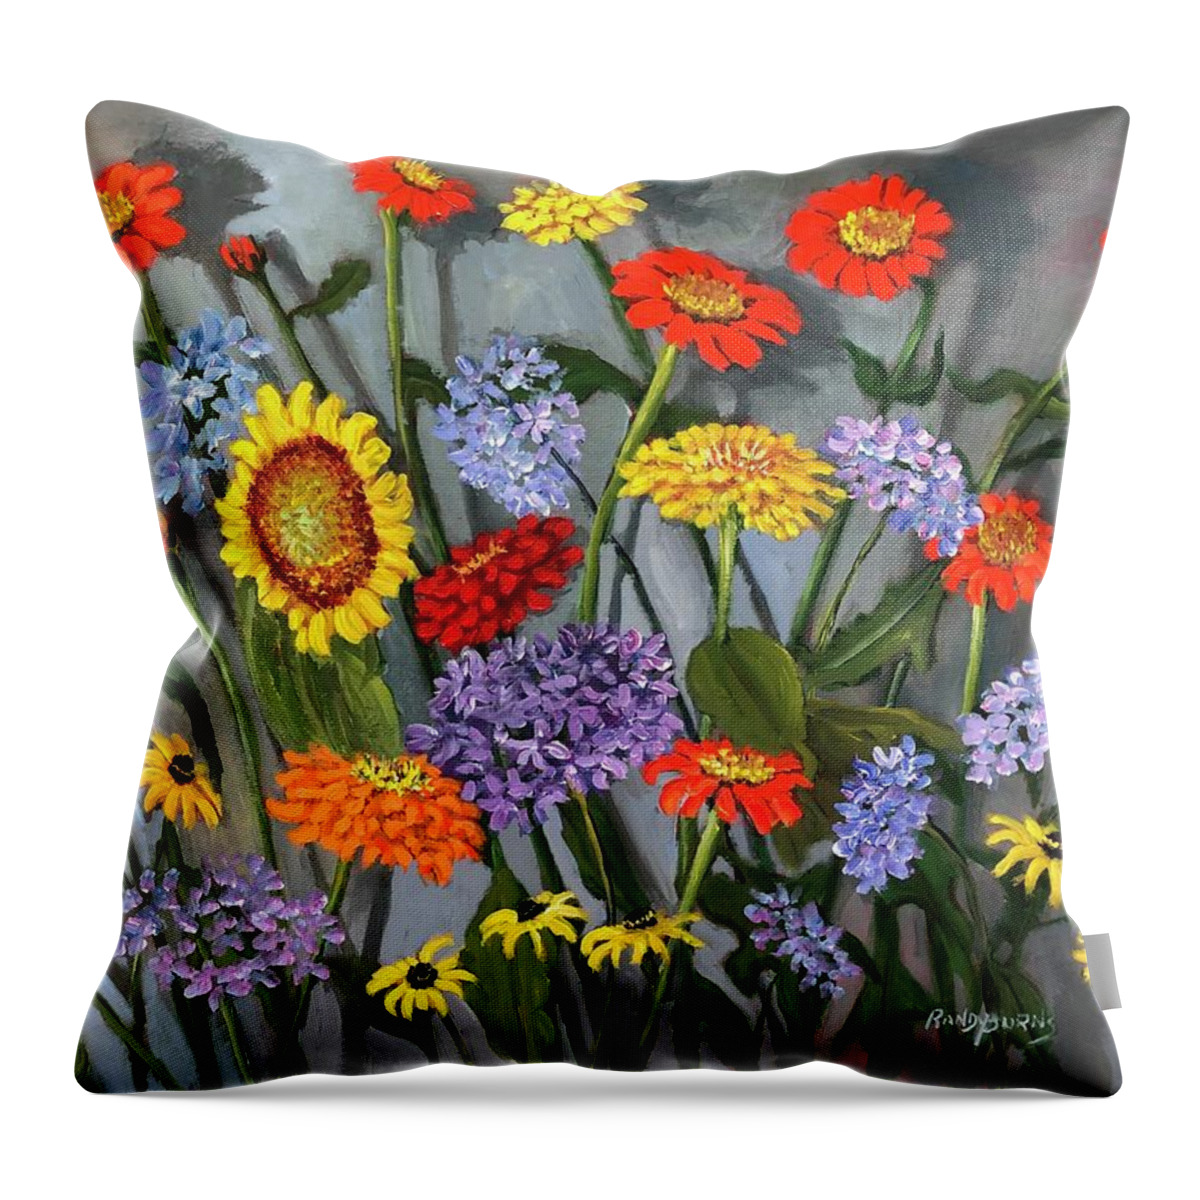 Actors Throw Pillow featuring the painting Flowers Of Mexico by Rand Burns